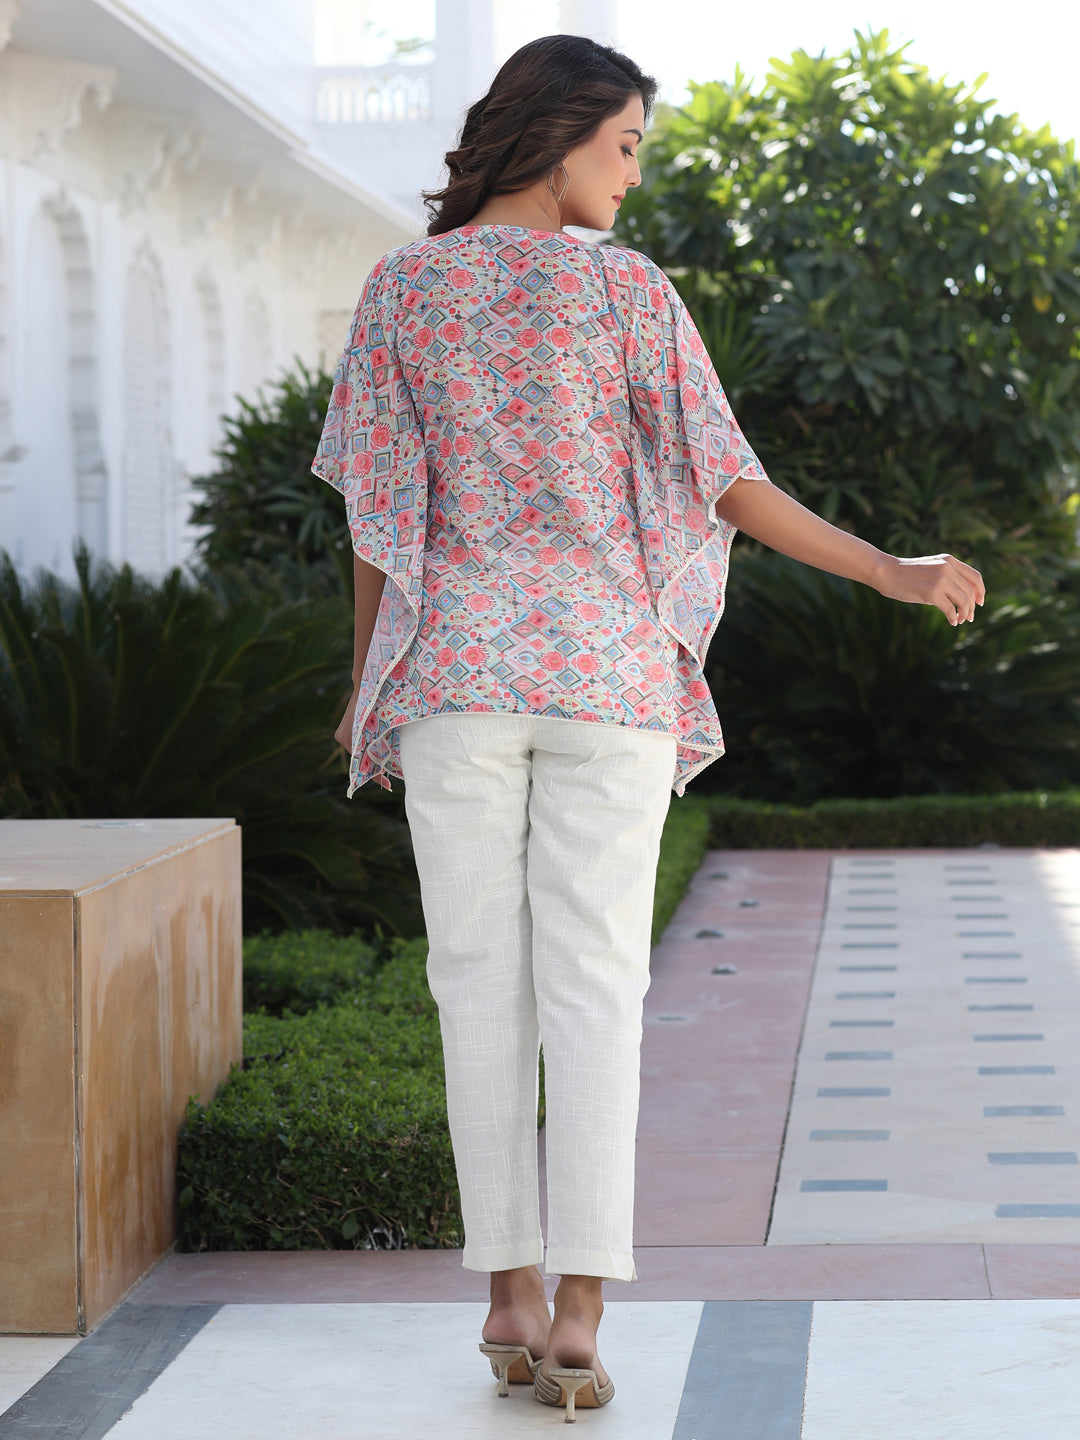 A Peach Geometric Printed Georgette Kaftan Top With Pintucks And Lace Details At The Yoke